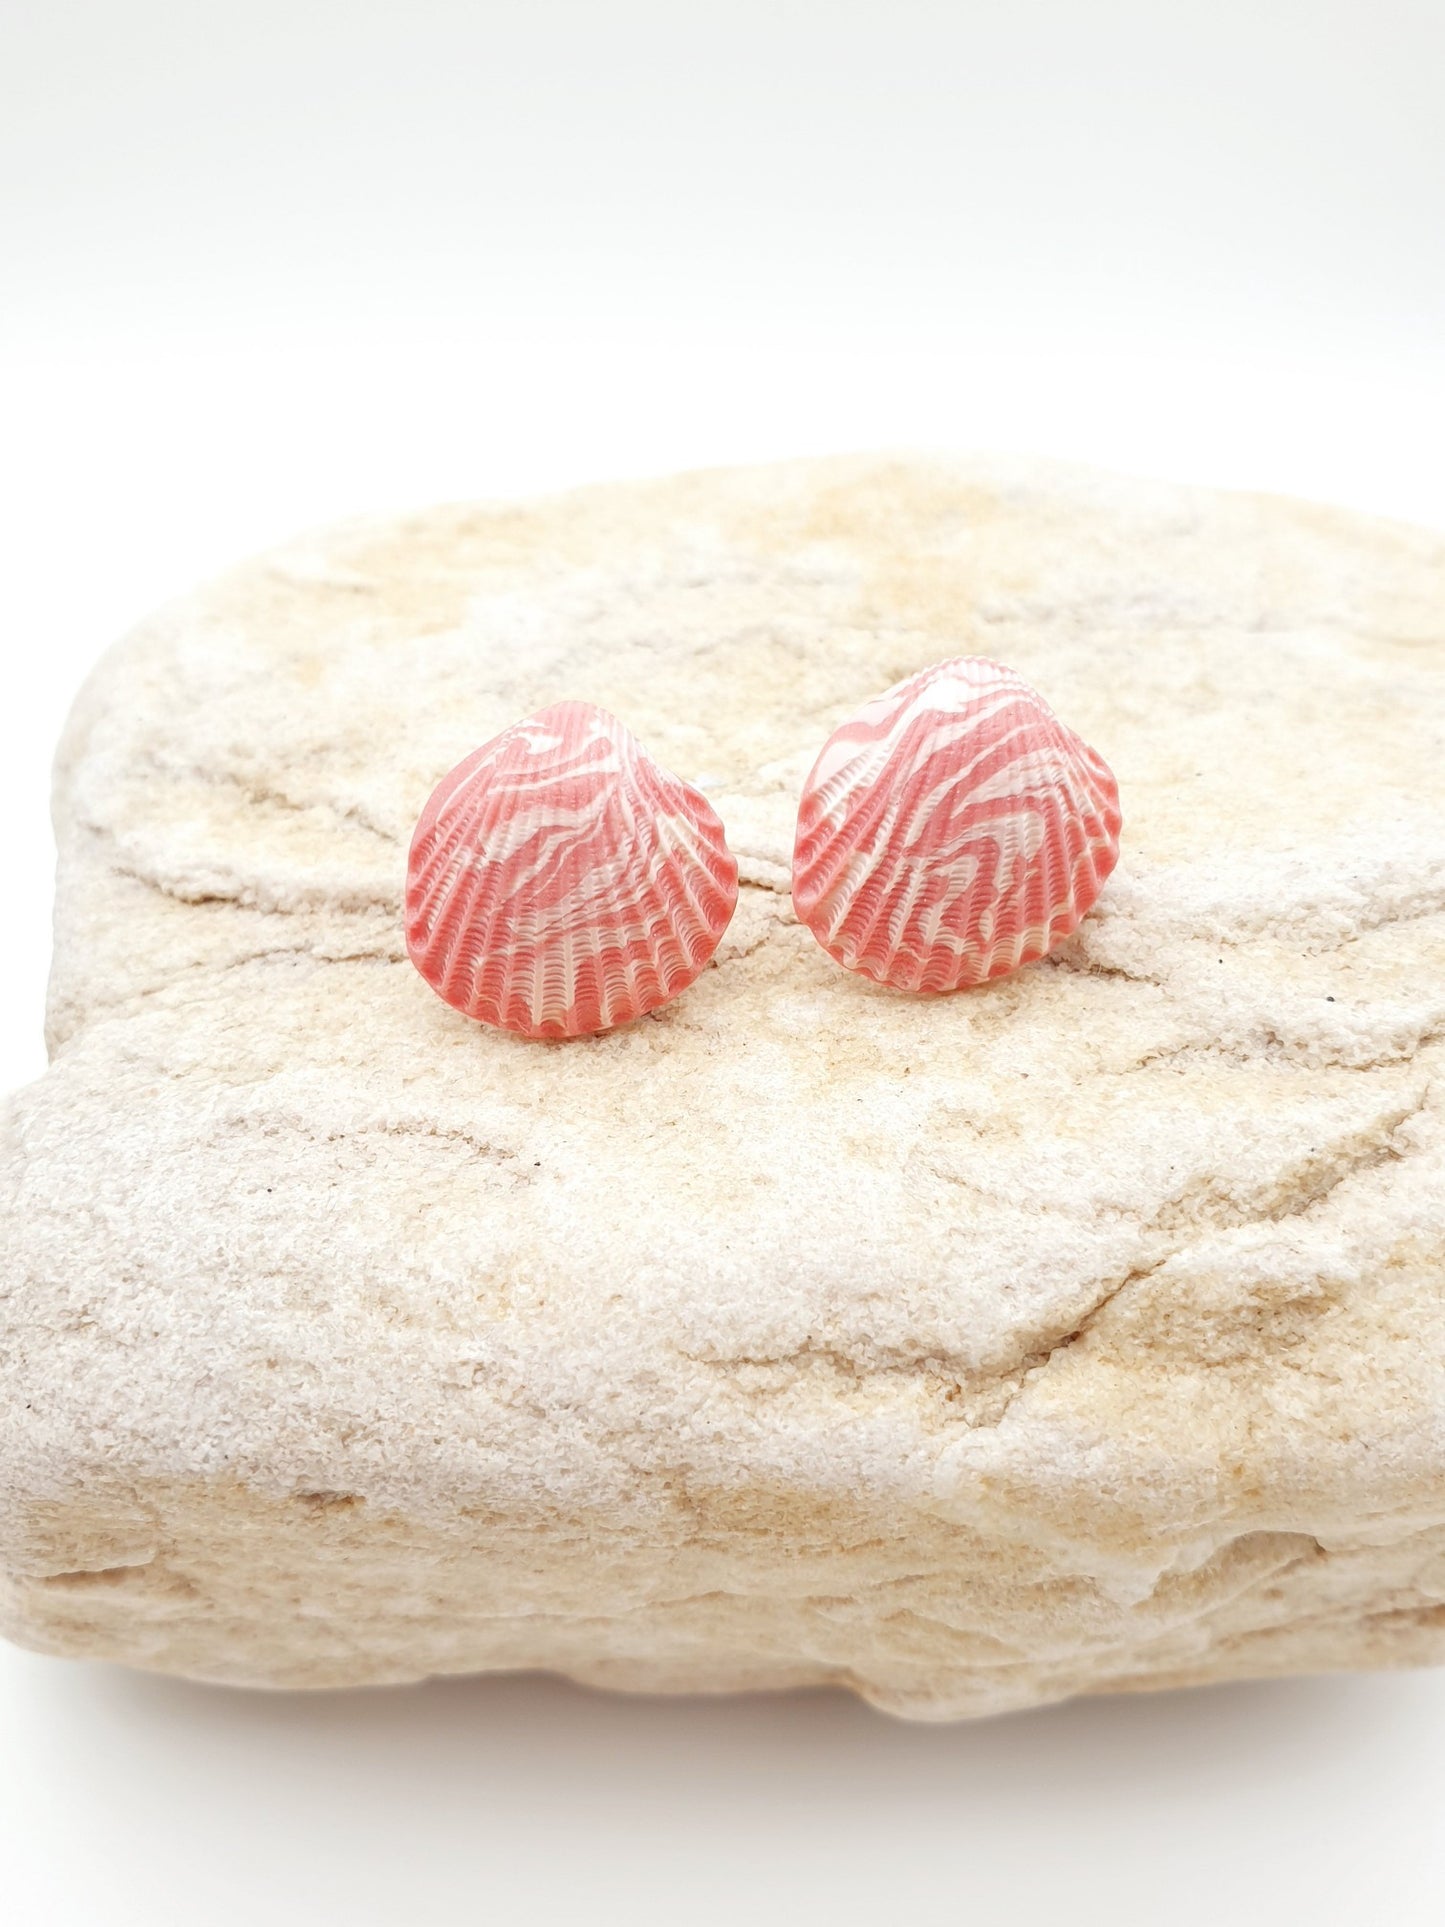 Earring studs - pink & white cockle shells